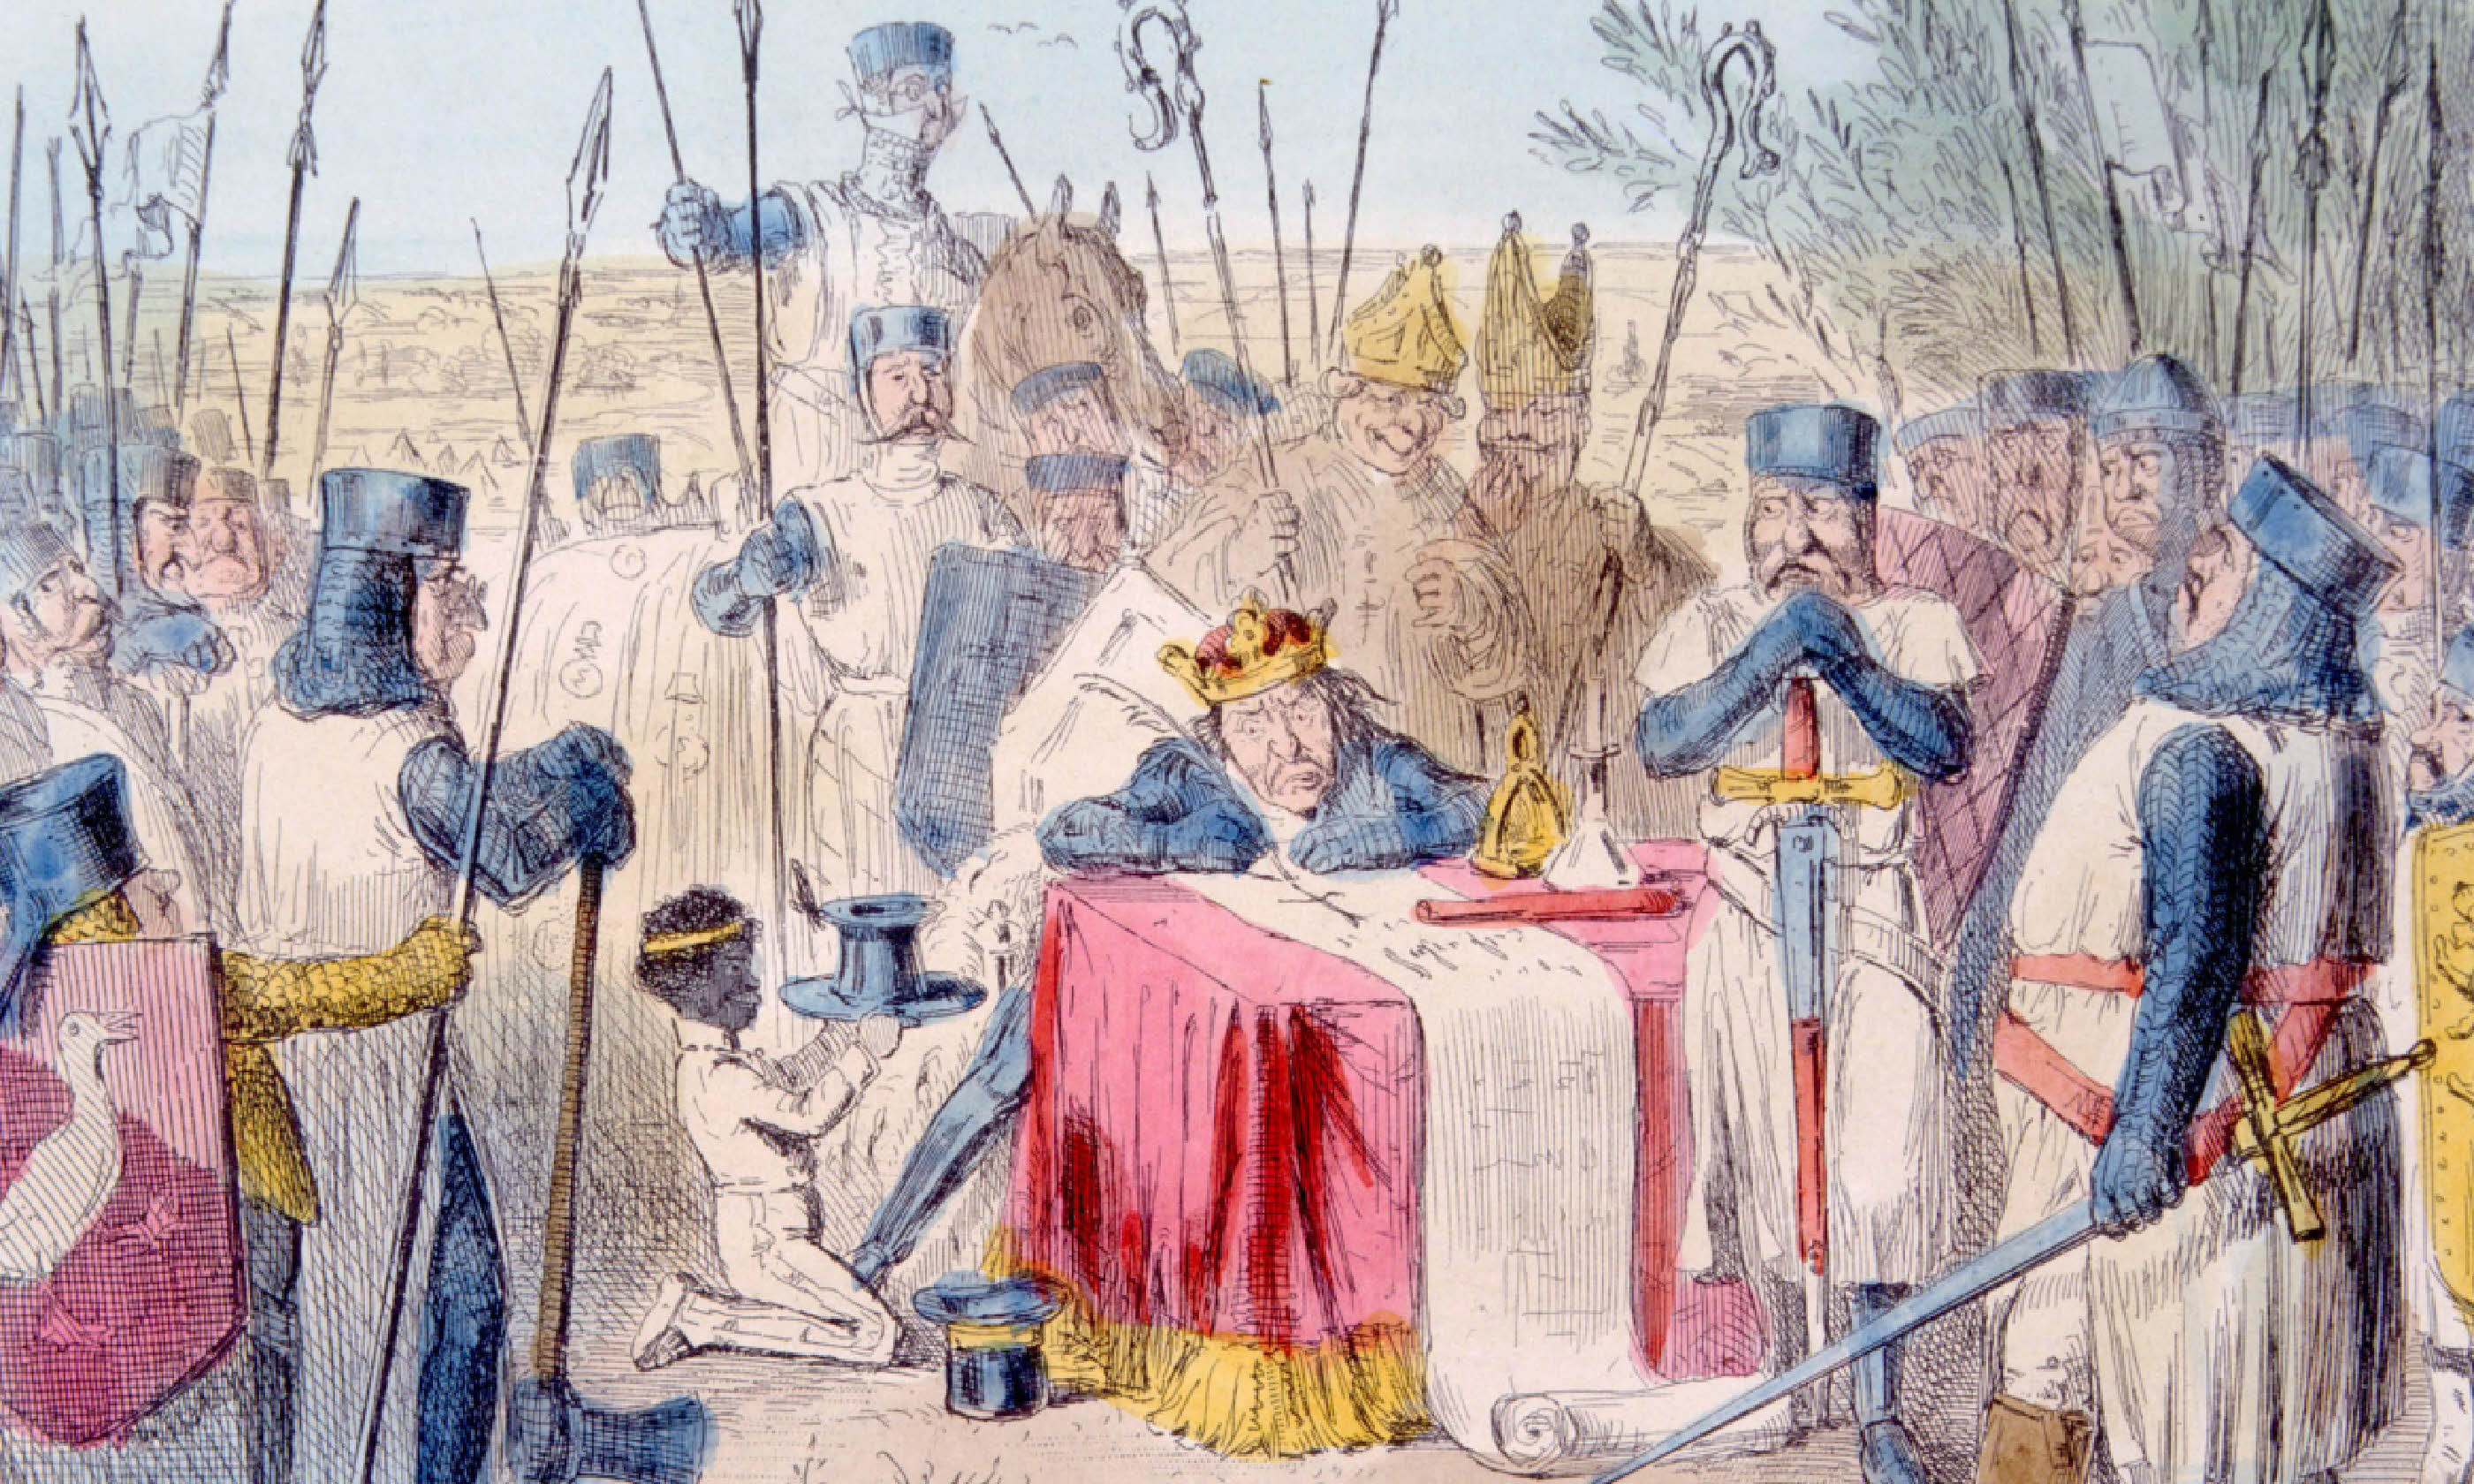 The Magna Carta being signed by King John, 1215, illustration by John Leech published 1875 (Shutterstock: see credit below)